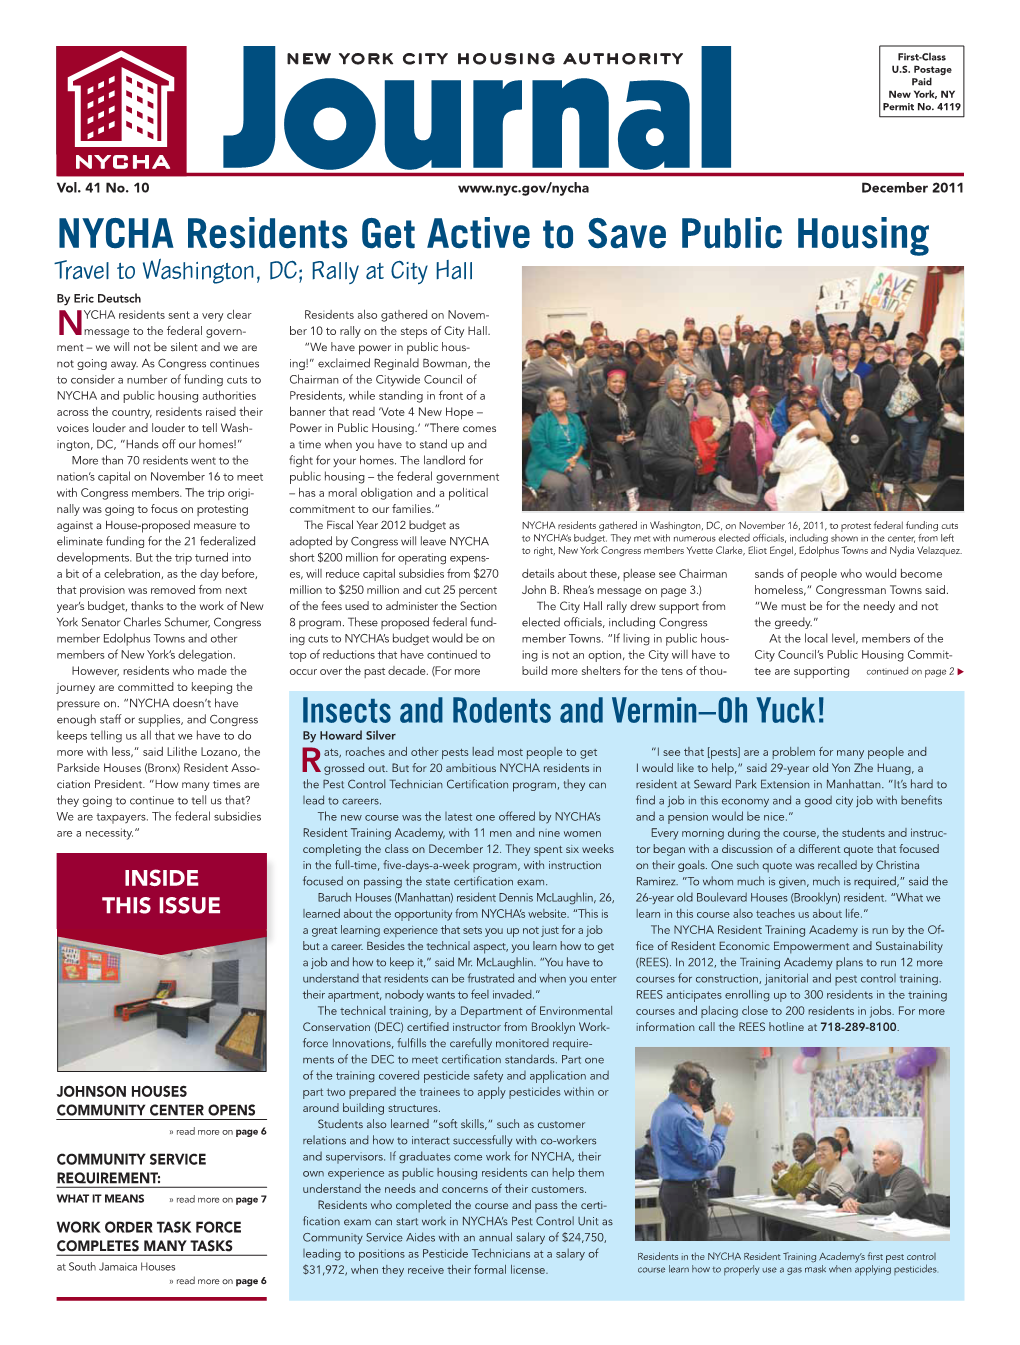 NYCHA Residents Get Active to Save Public Housing